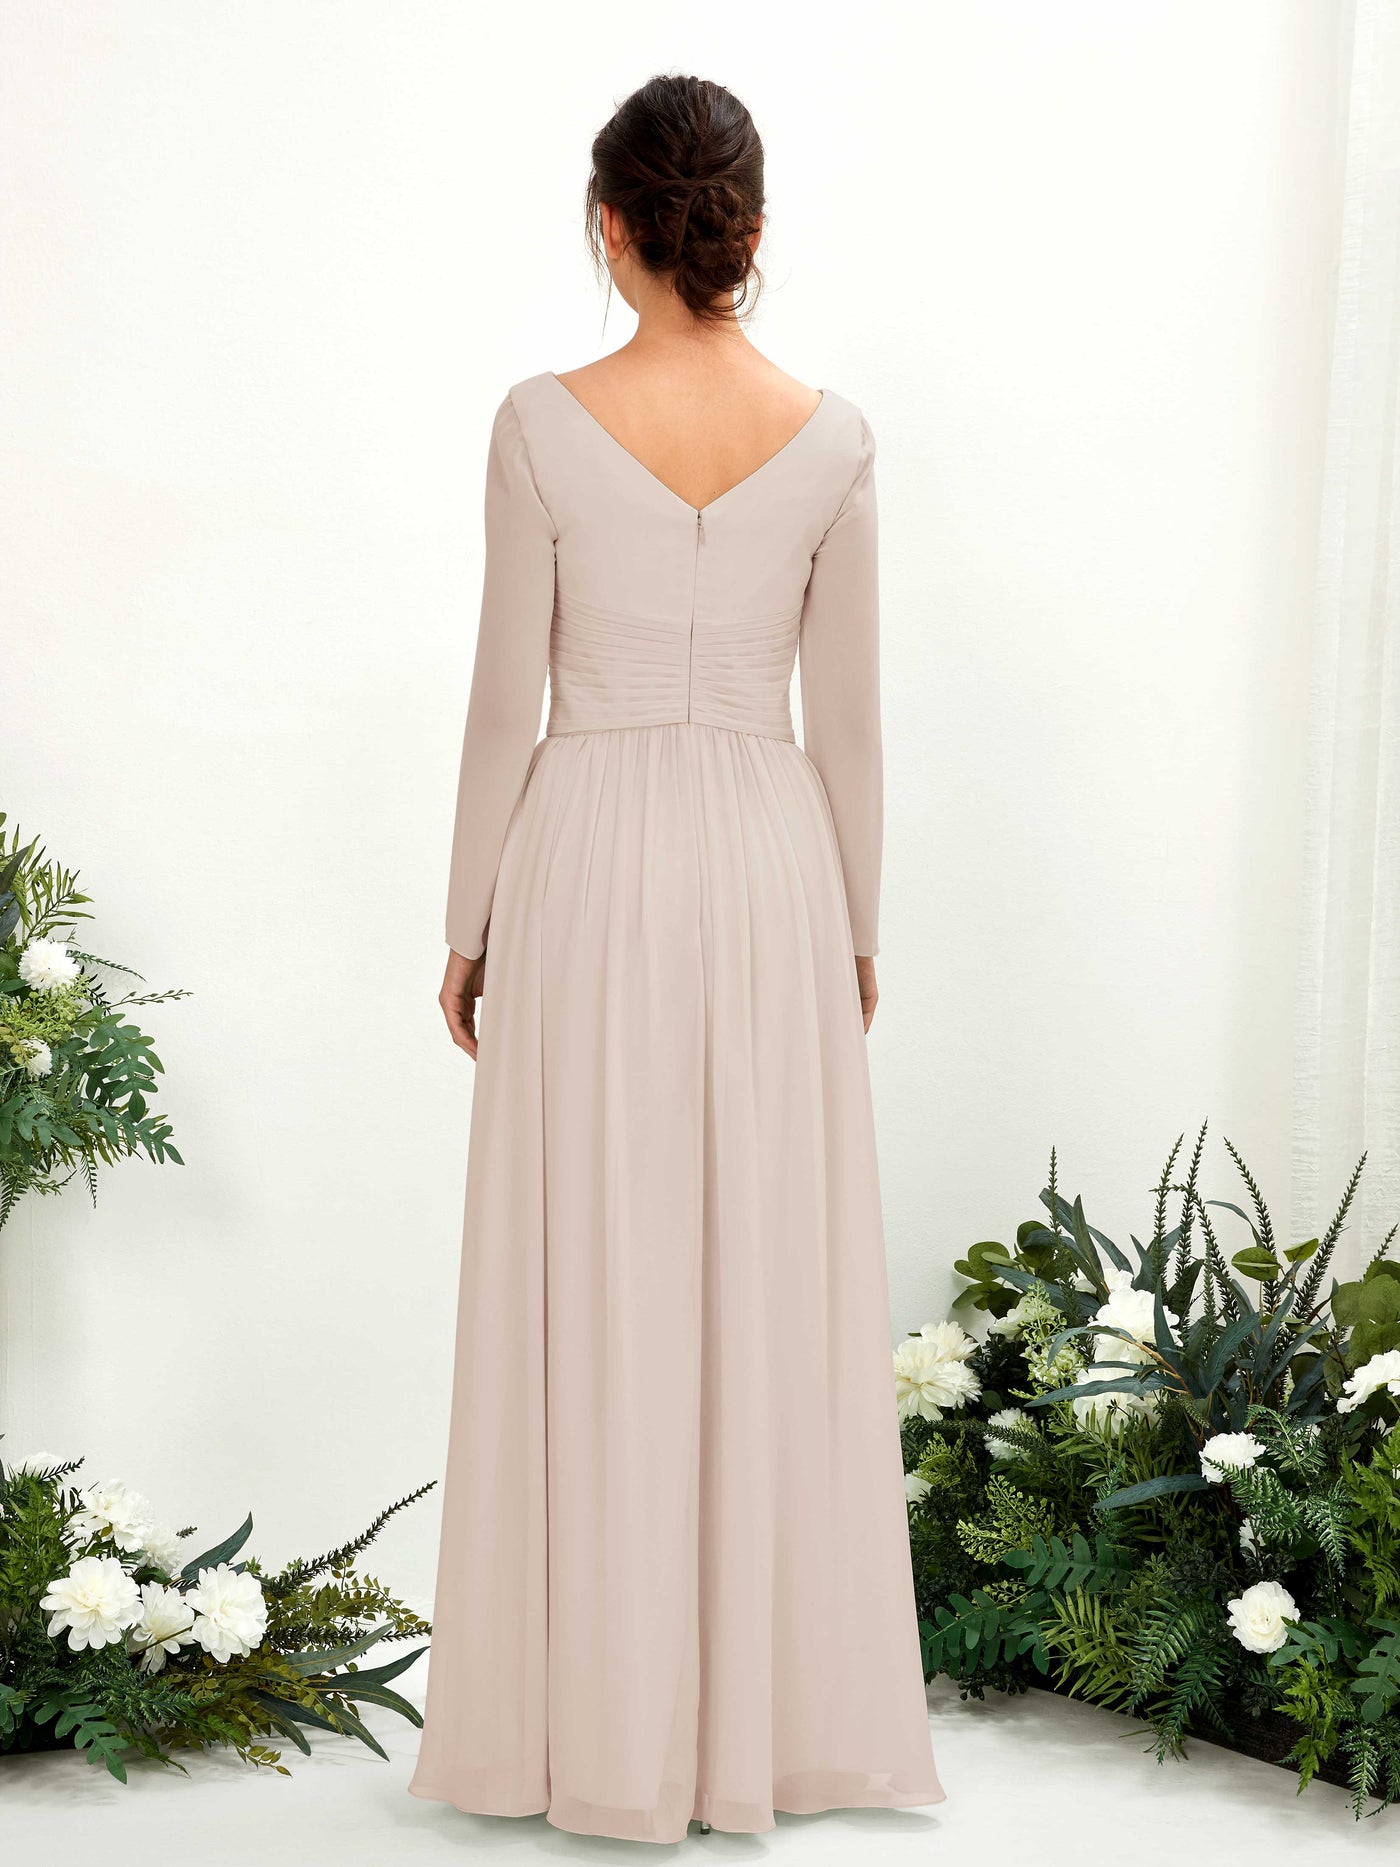 Champagne Bridesmaid Dresses Bridesmaid Dress A-line Chiffon V-neck Full Length Long Sleeves Wedding Party Dress (81220316)#color_champagne